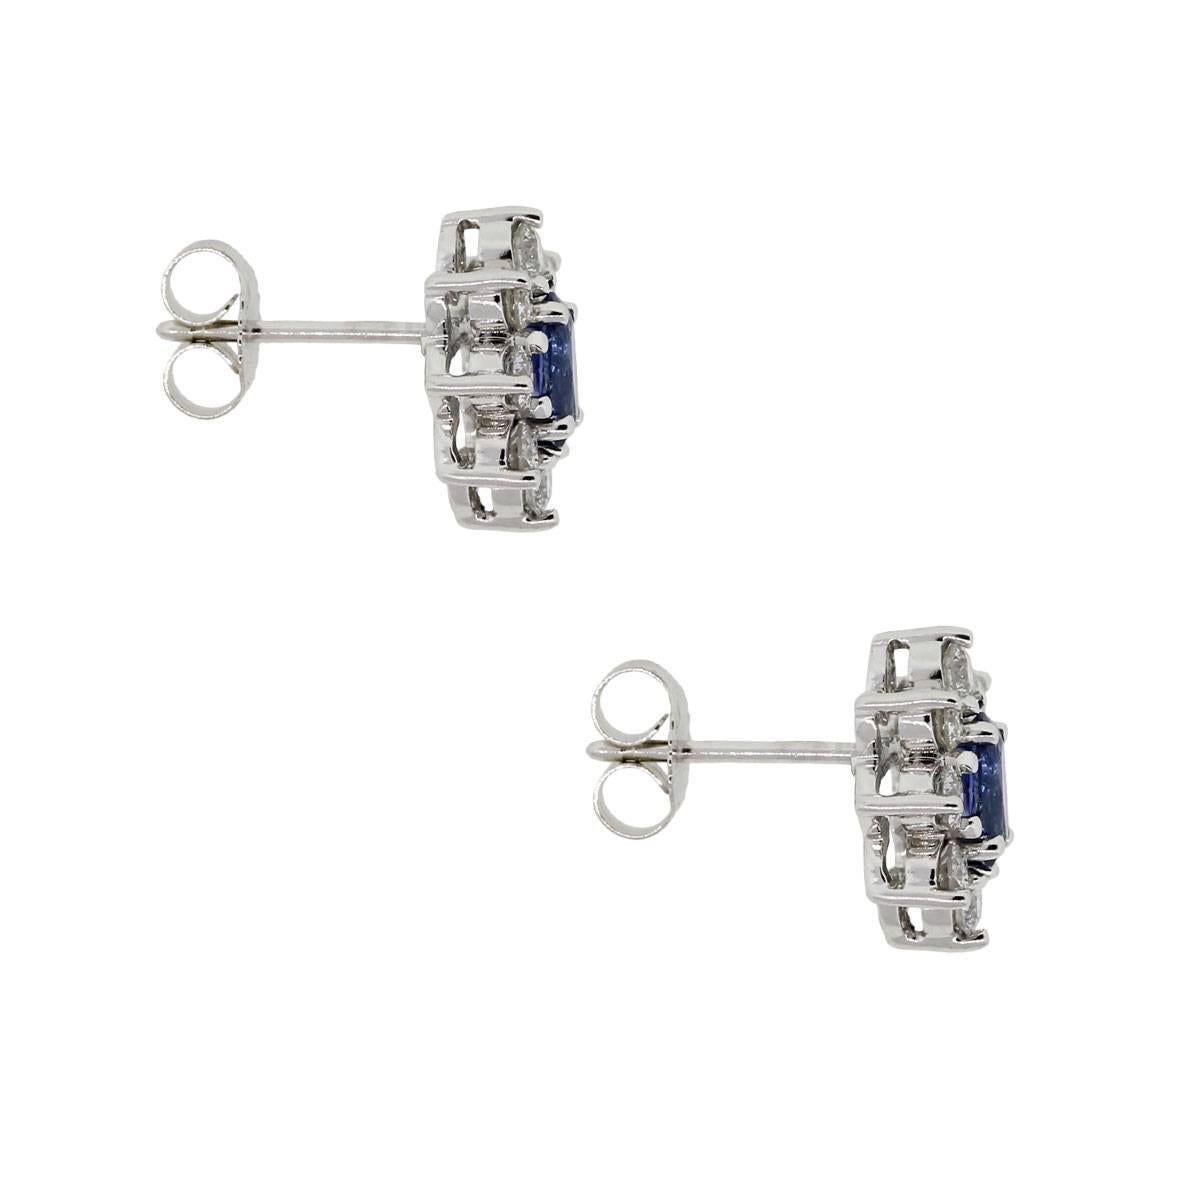 Material: 18k white gold
Diamond Details: Approximately 0.80ctw of round brilliant diamonds. Diamonds are G in color and VS in clarity
Gemstone Details: Approximately 0.80ctw of oval shape sapphires.
Earring Backs: Post friction
Earring